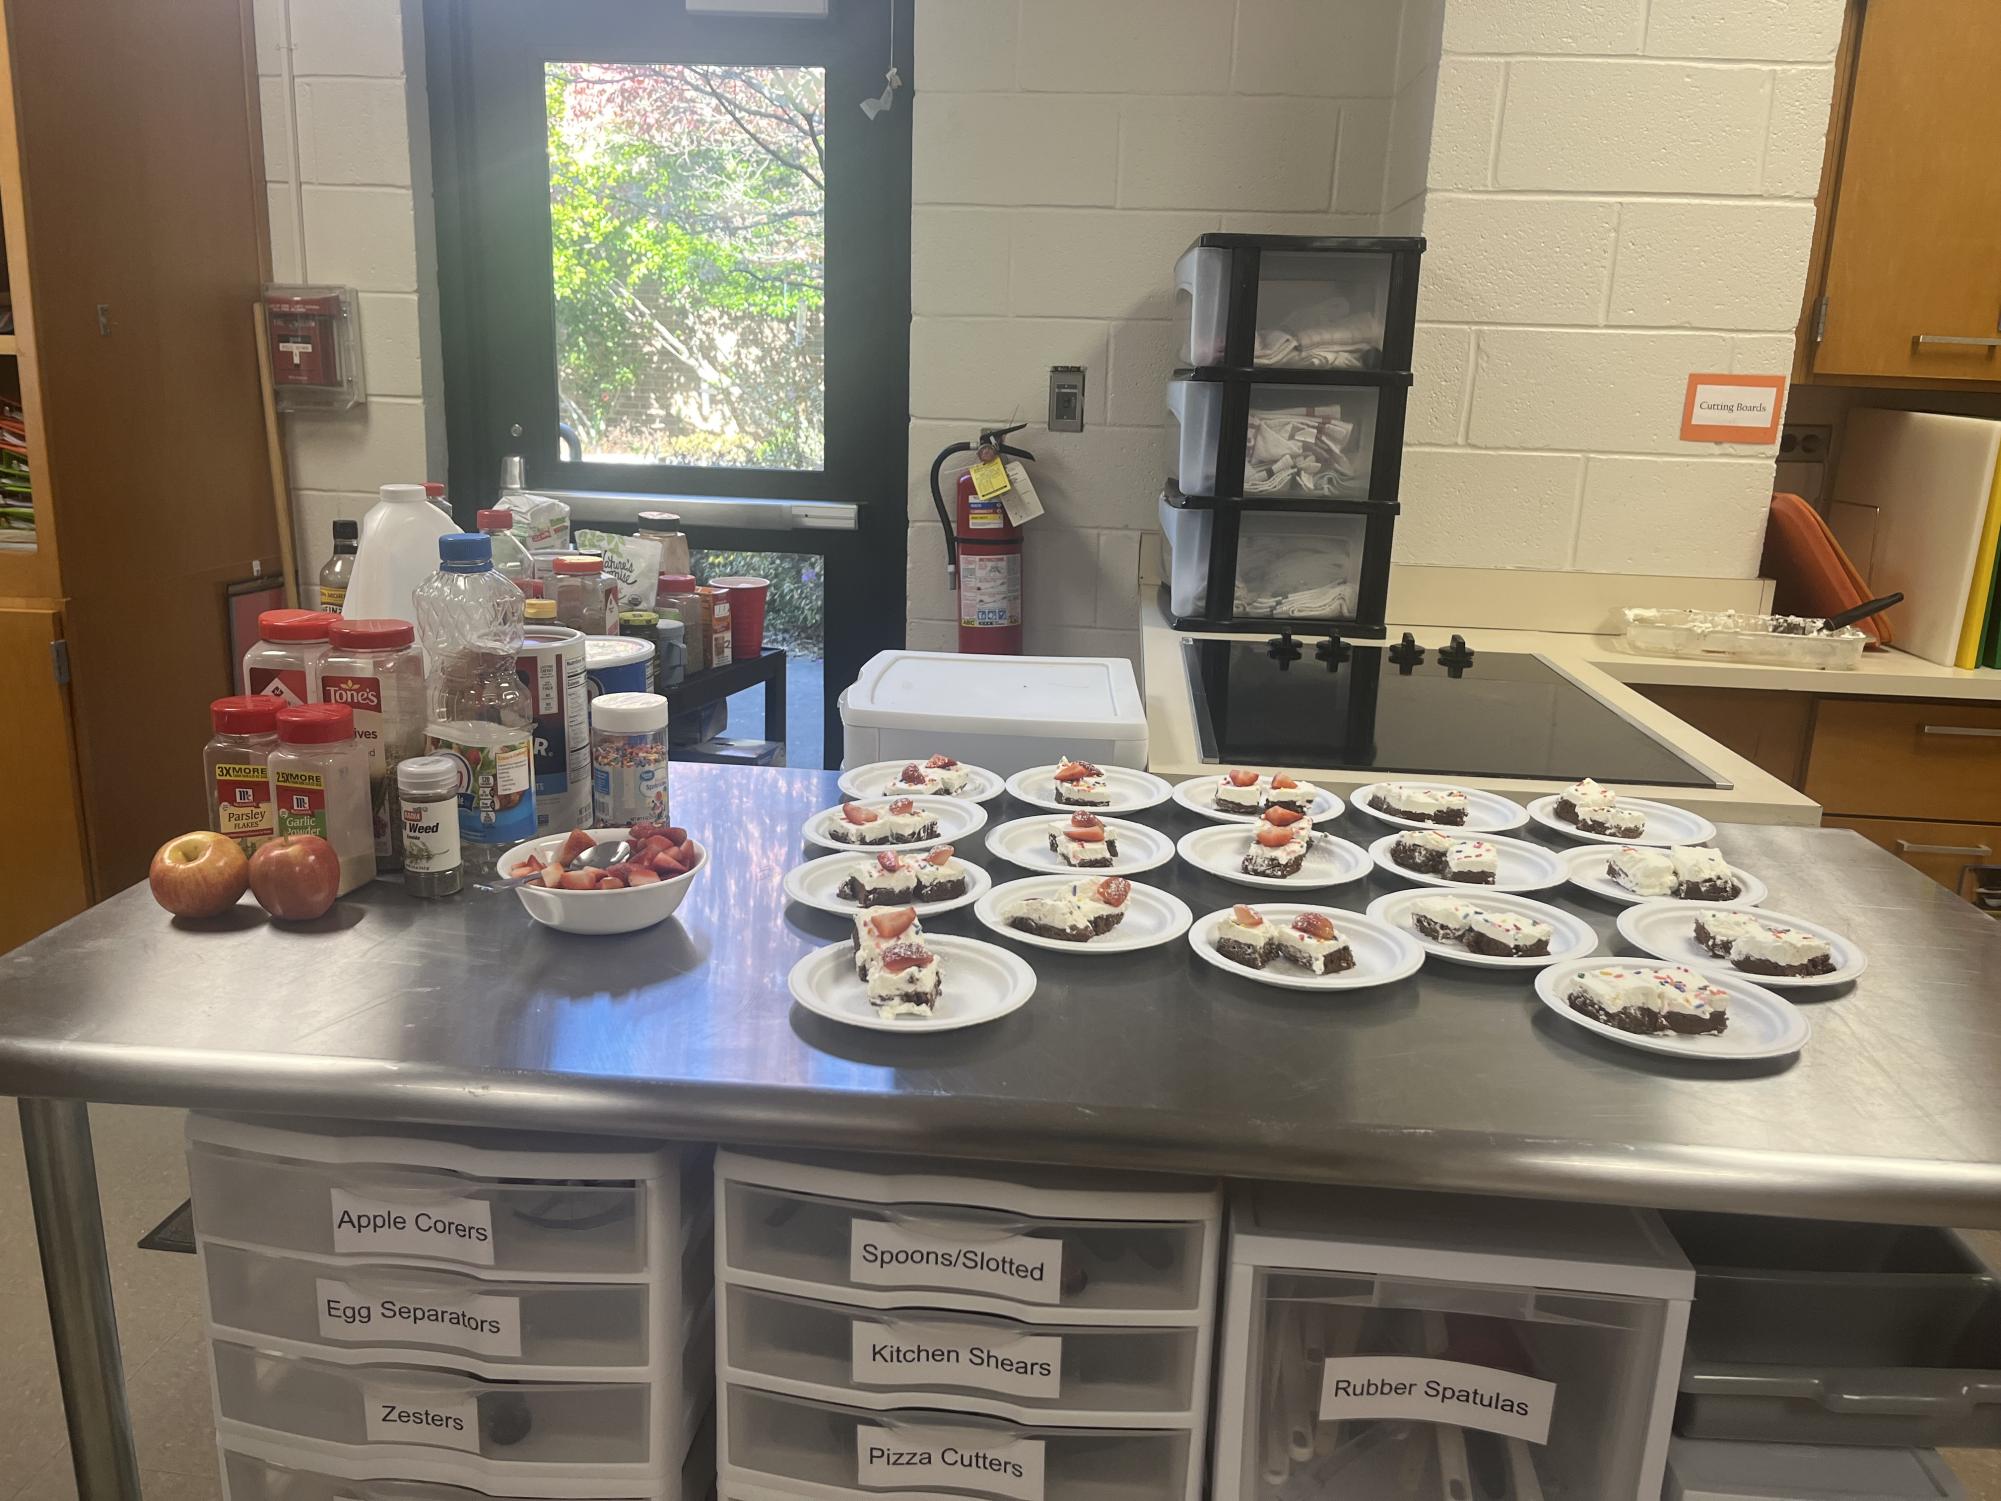 The Food and Nutrition classes finished products after their food truck projects.